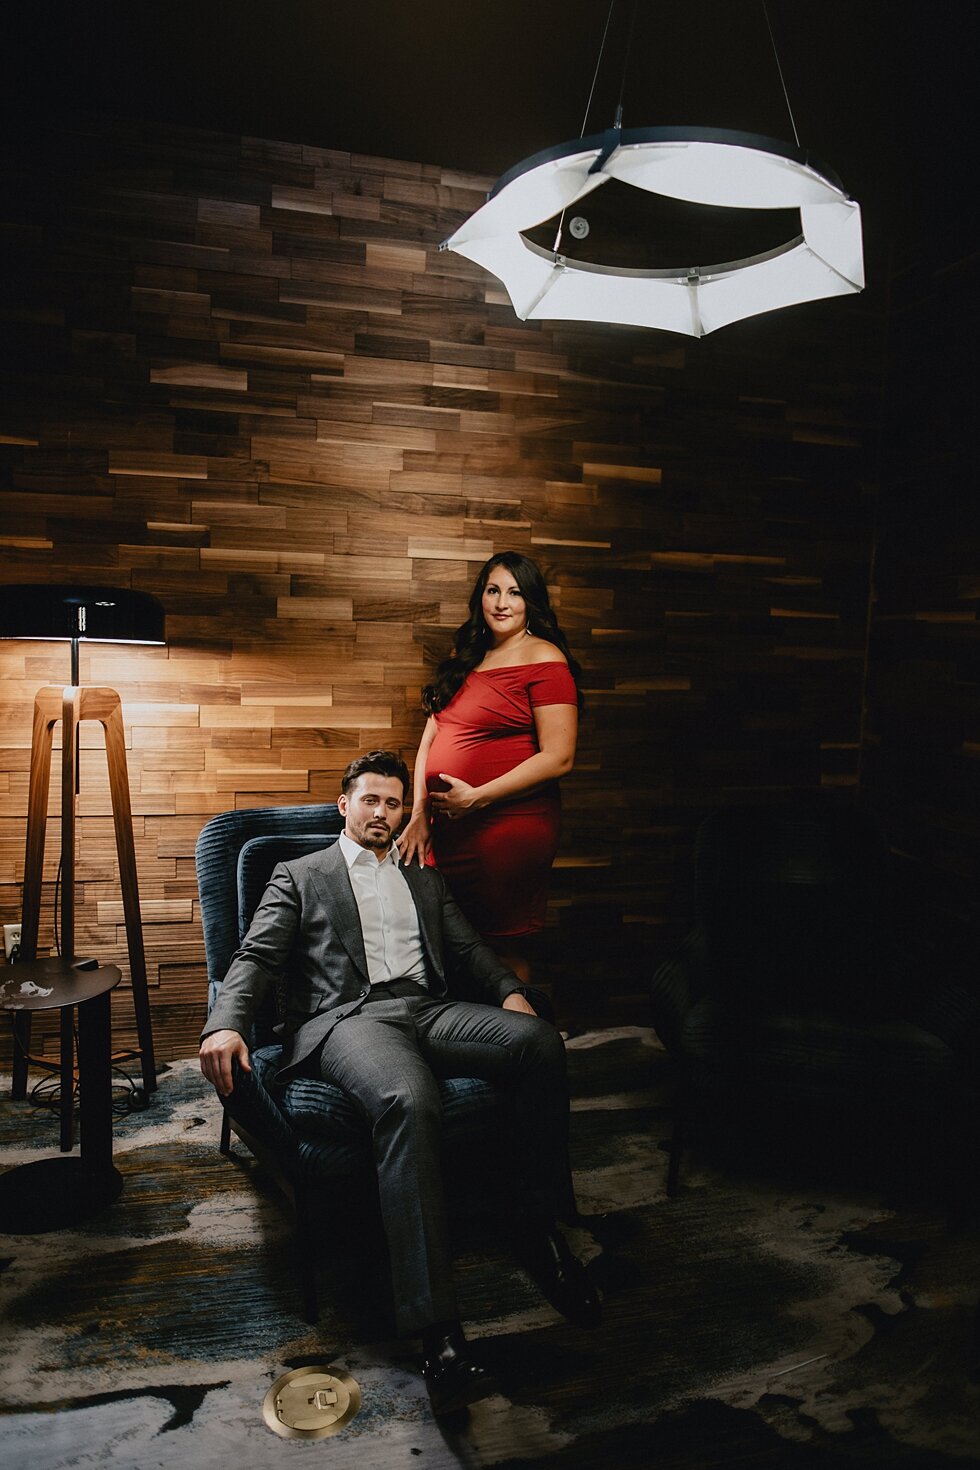  Dim lighting and textured backgrounds were the perfect fit for this elegant and romantic styled maternity photo session. #maternitygoals #maternityphotographer #babybump #kentuckyphotographer #fancymaternitysession #modernmaternitysession #urbanmate